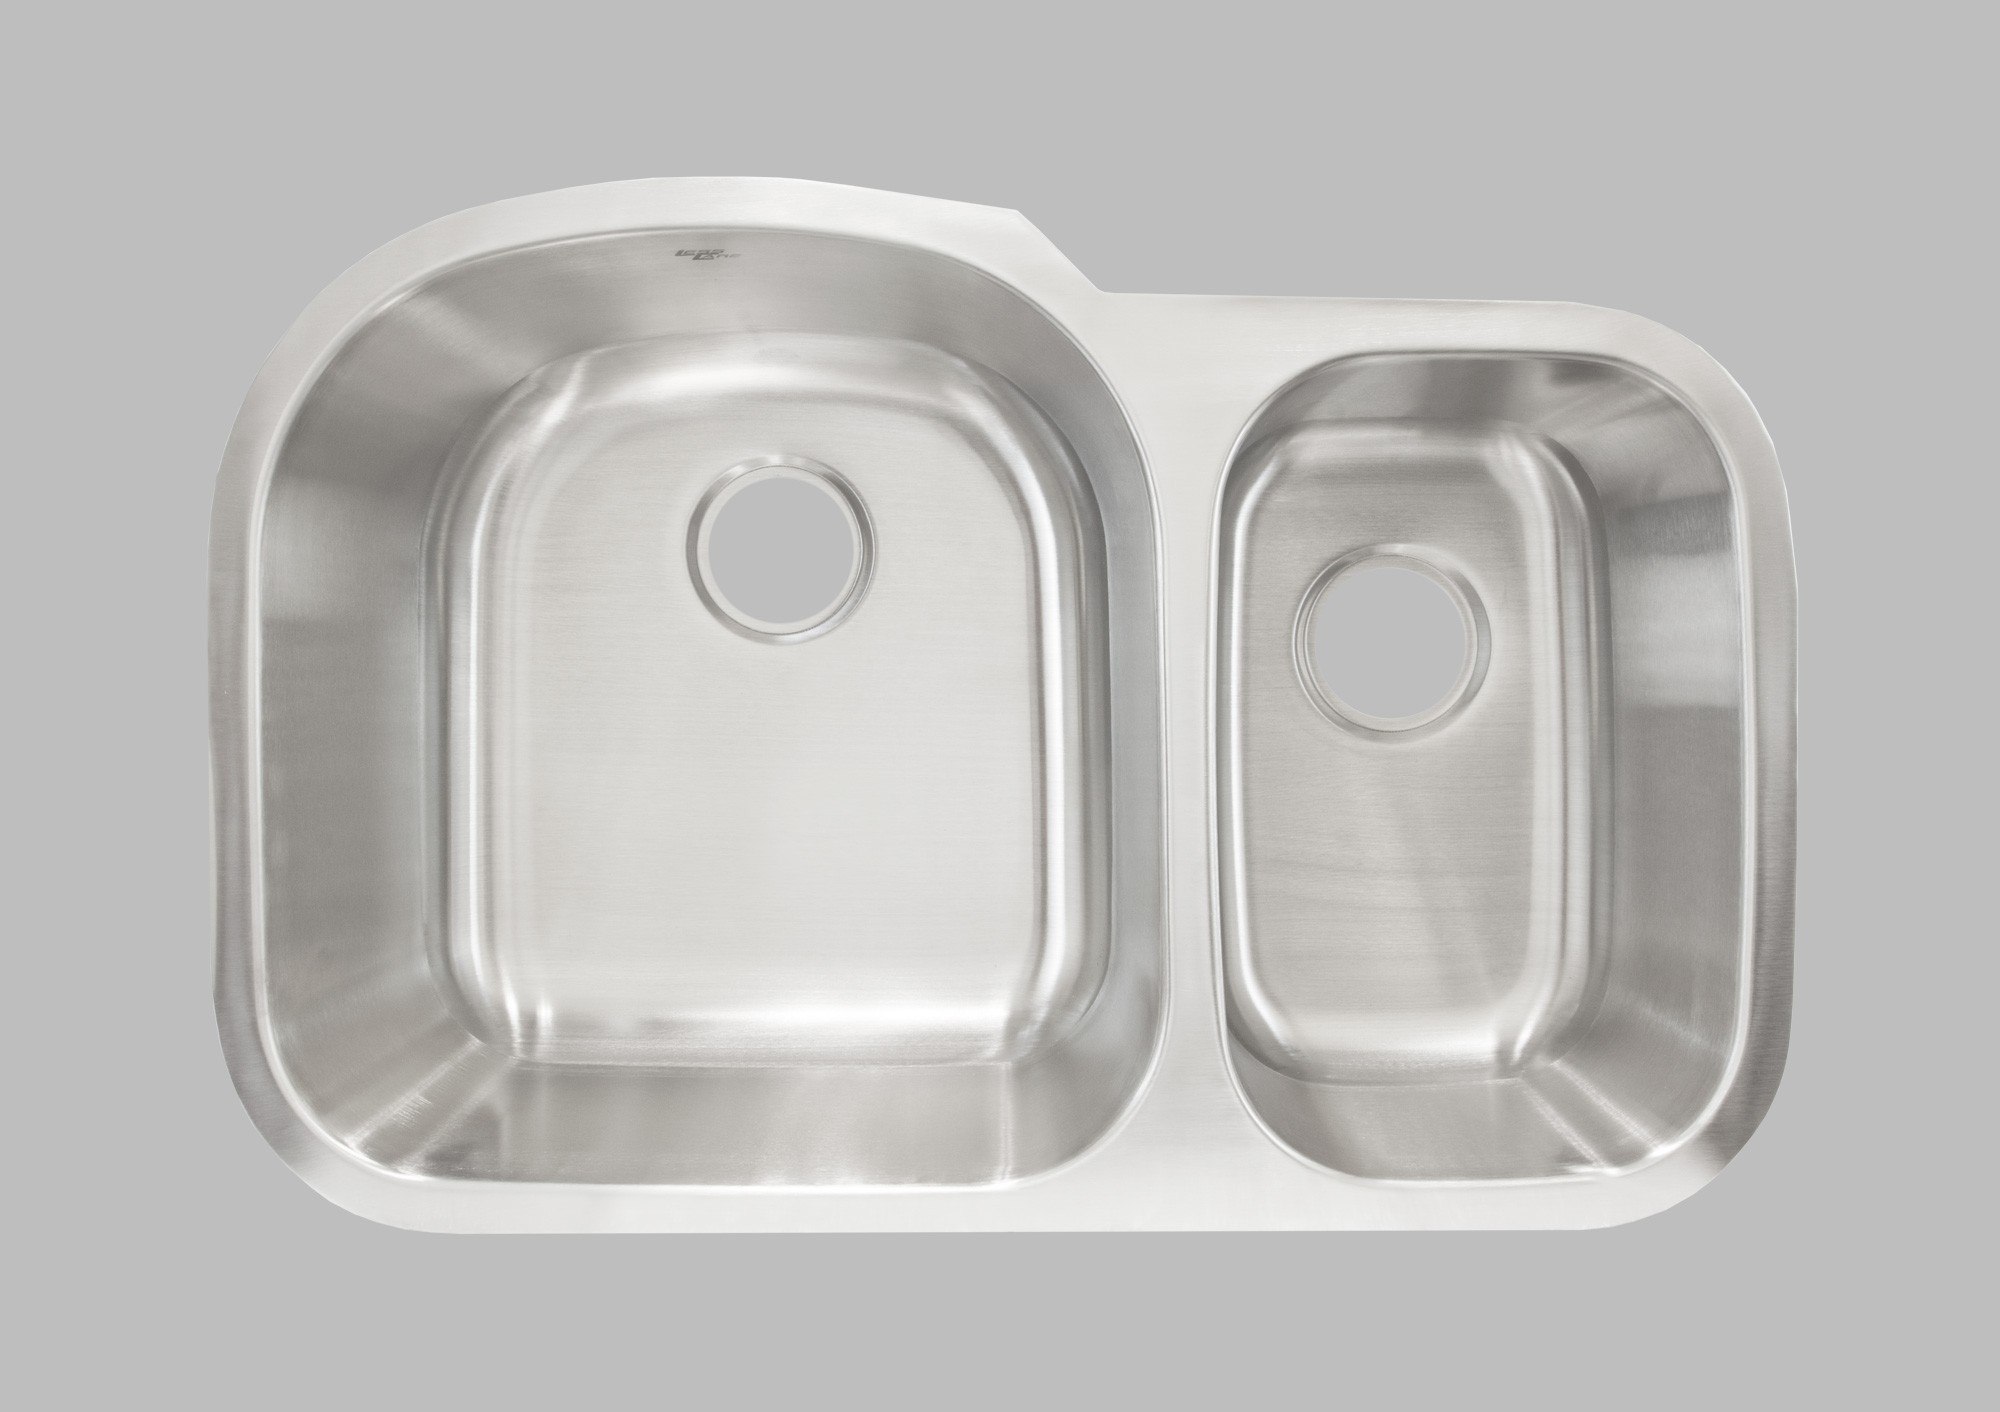 LESS CARE L201R 31INCH UNDERMOUNT DOUBLE BOWL KITCHEN SINK